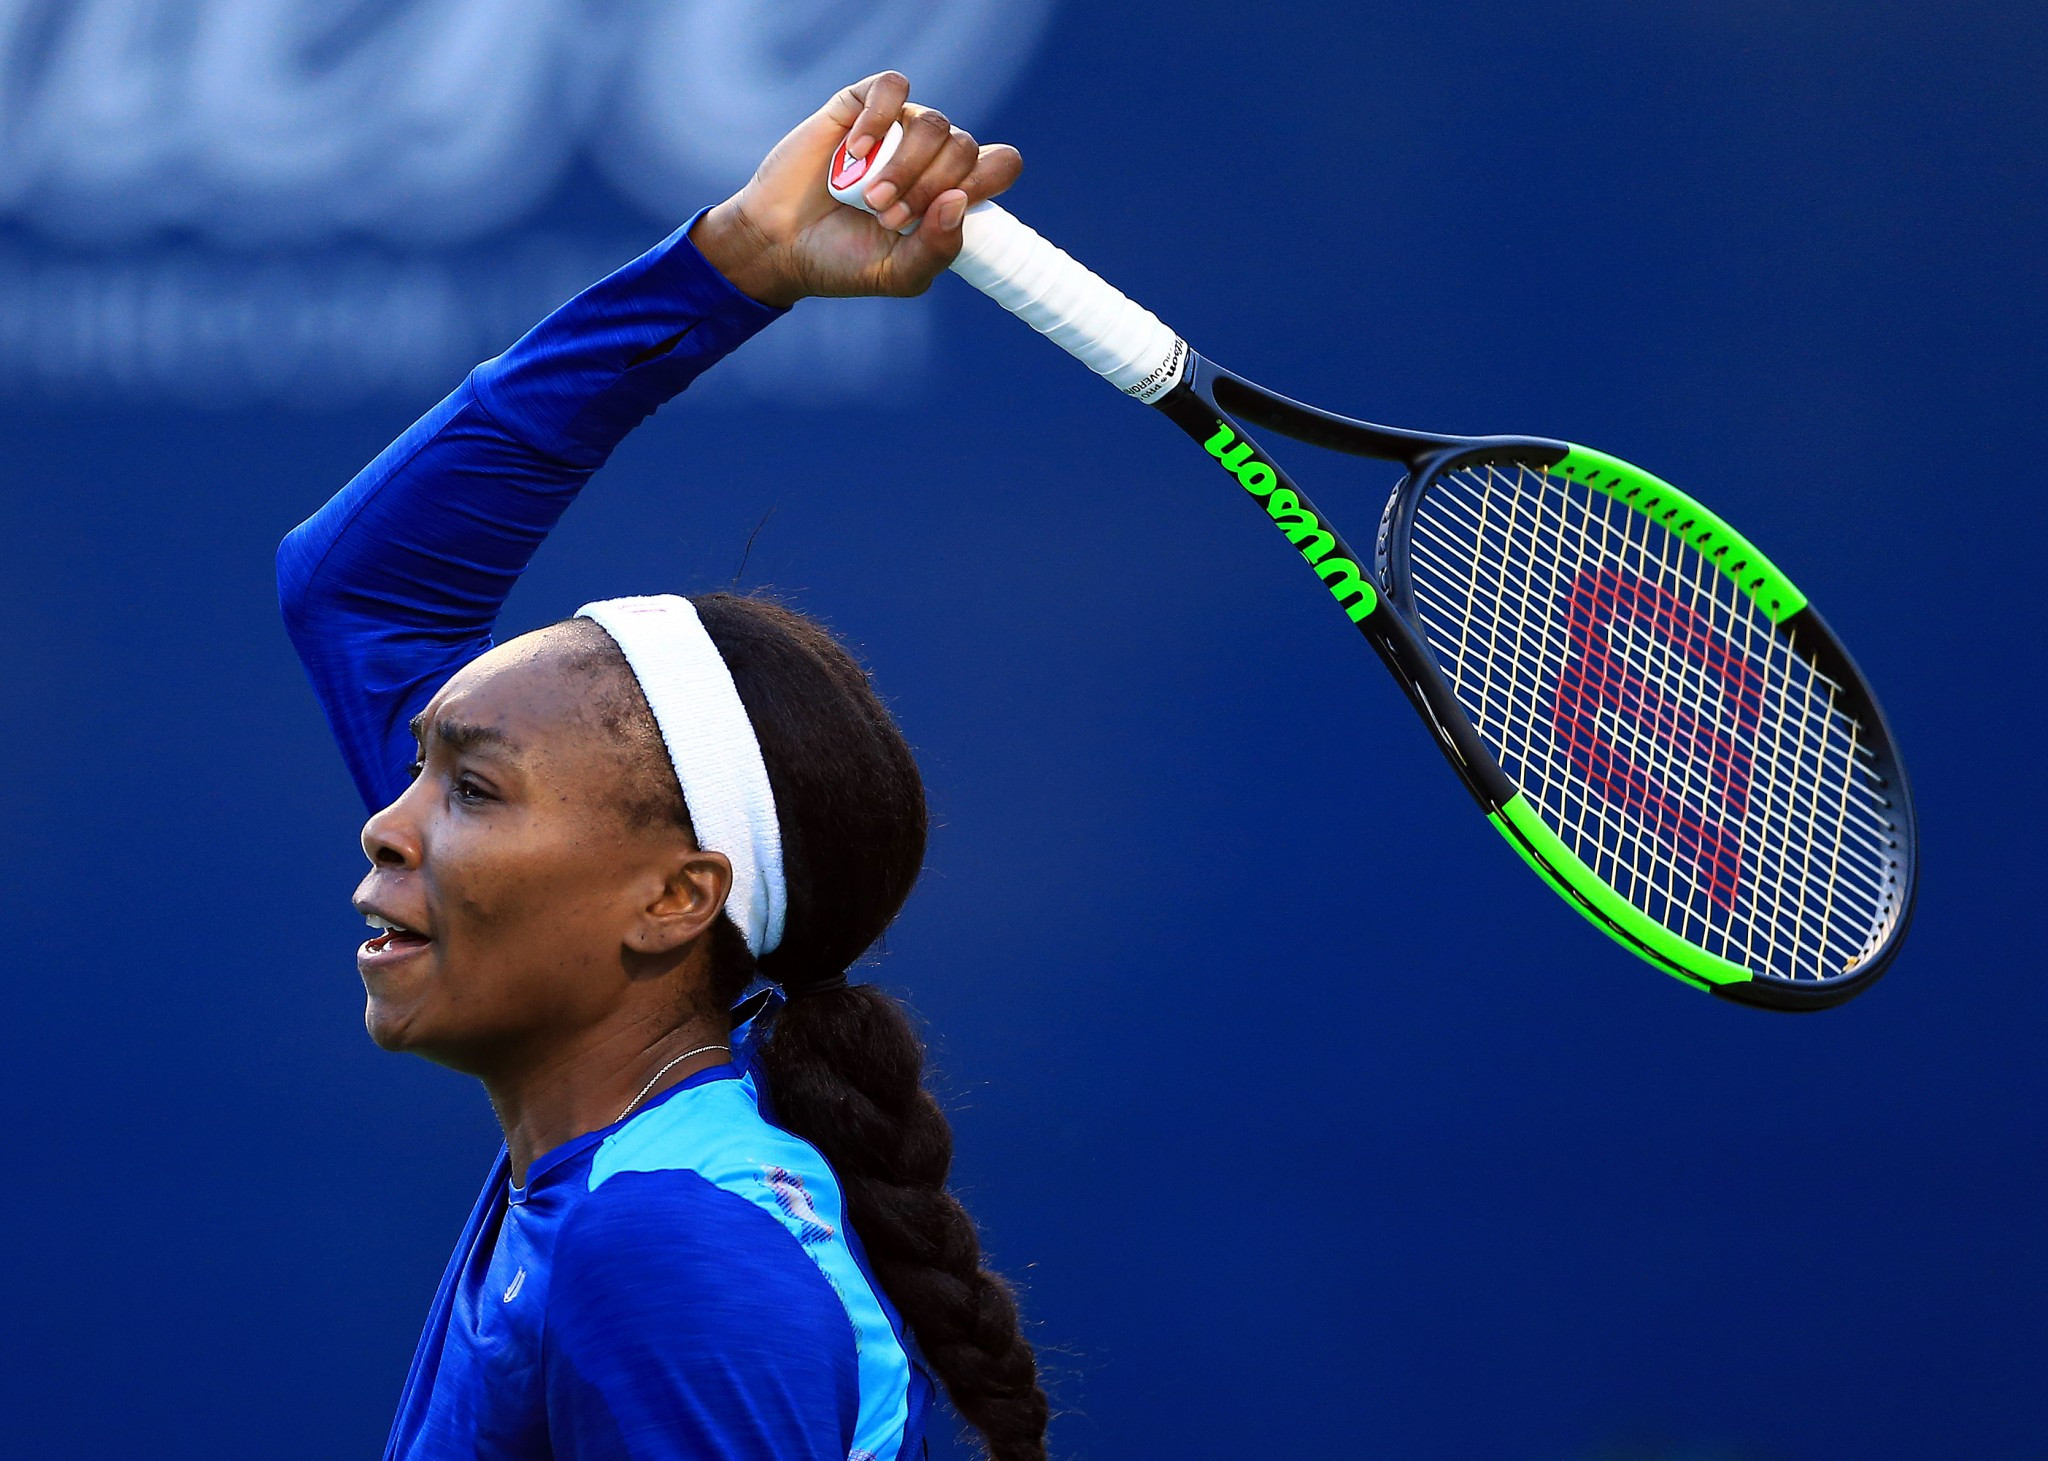 Venus Williams reached the second round of the Rogers Cup in Toronto ©Getty Images